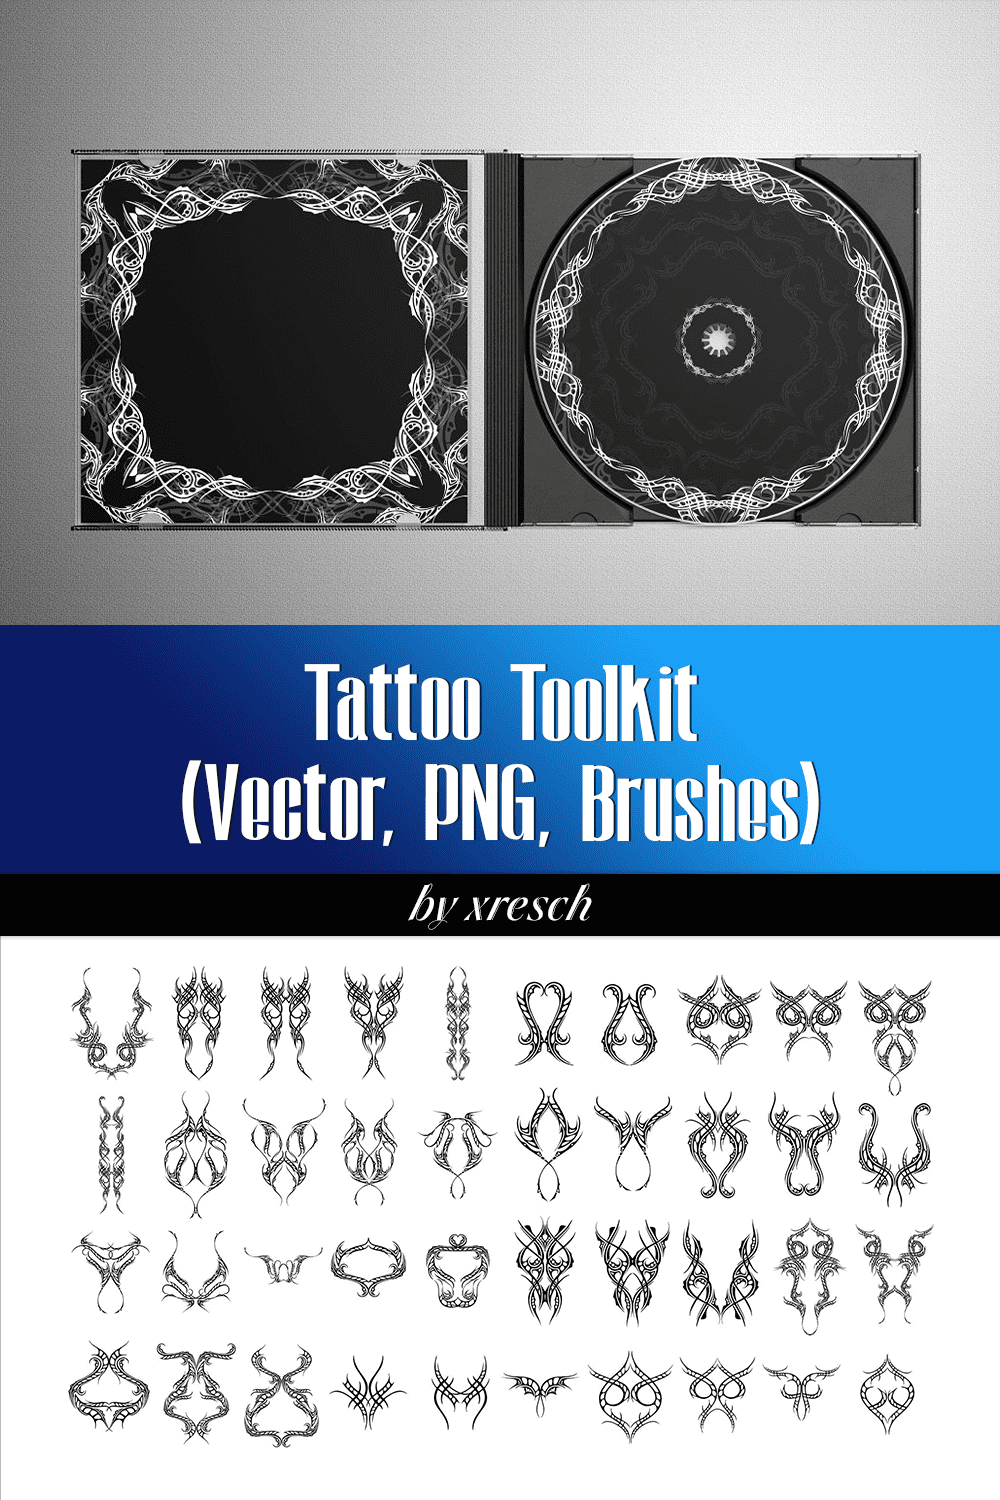 Tattoo Toolkit(Vector, PNG, Brushes) - Pinterest.